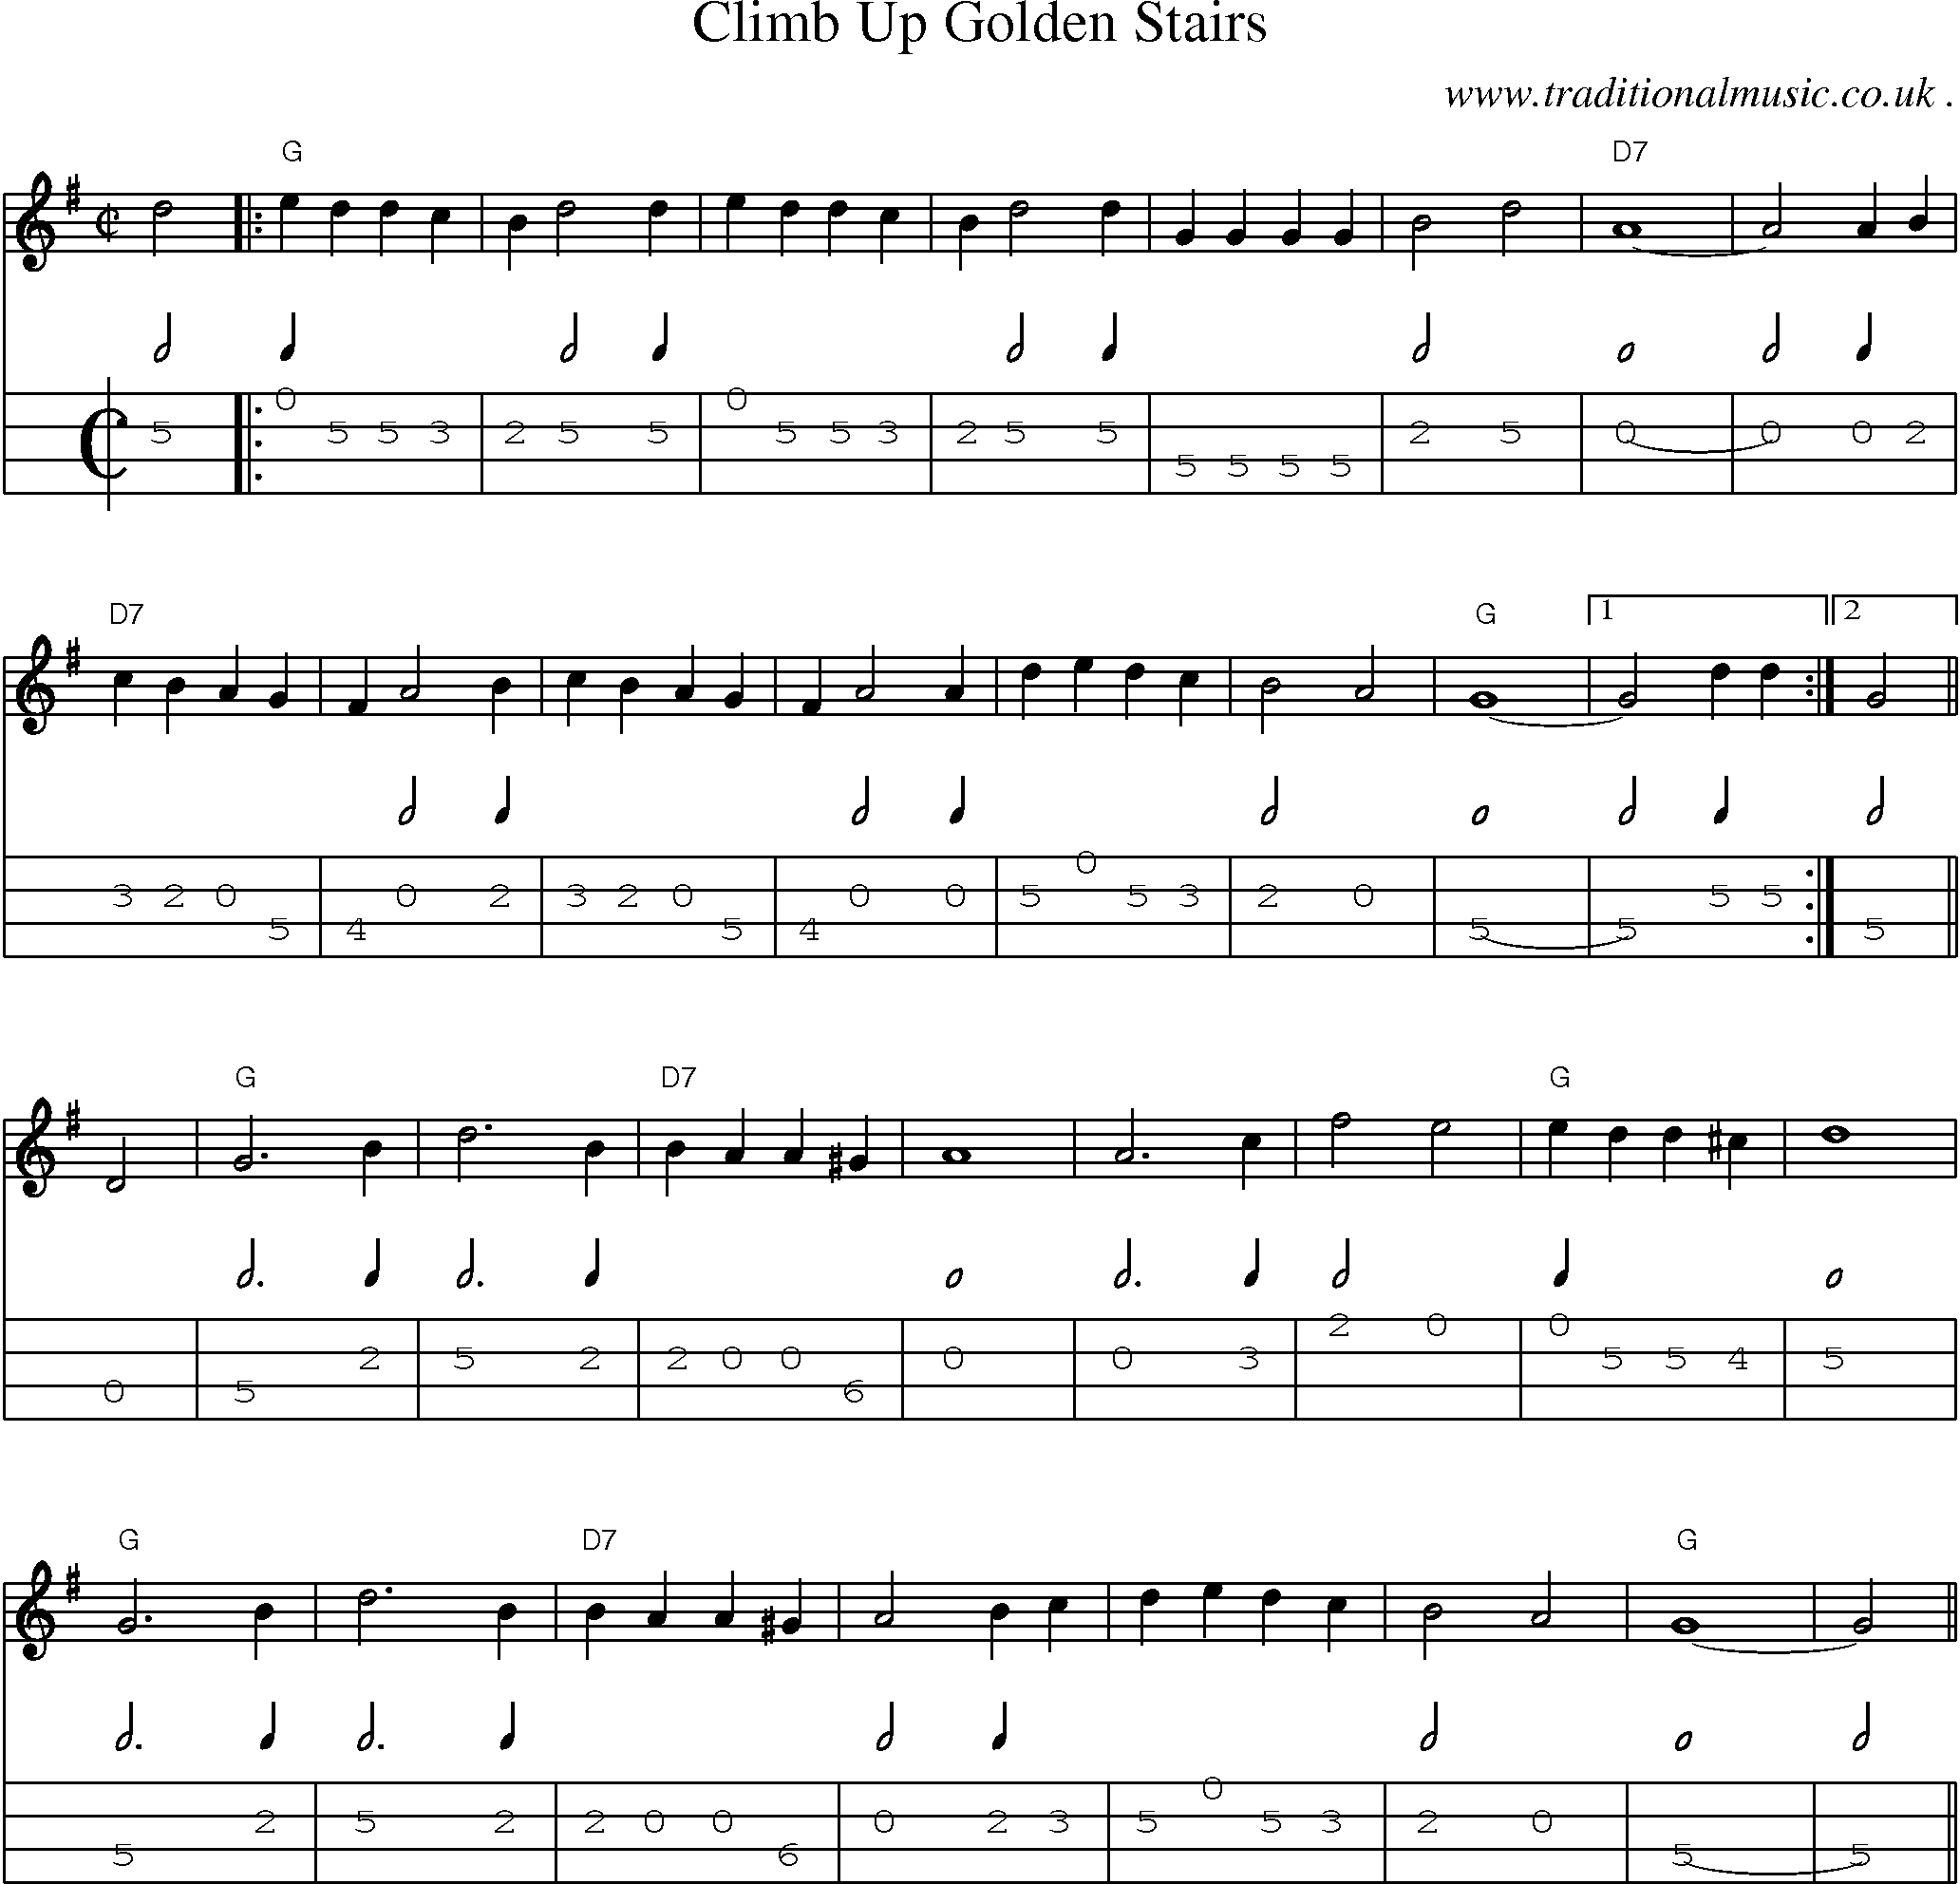 Music Score and Guitar Tabs for Climb Up Golden Stairs